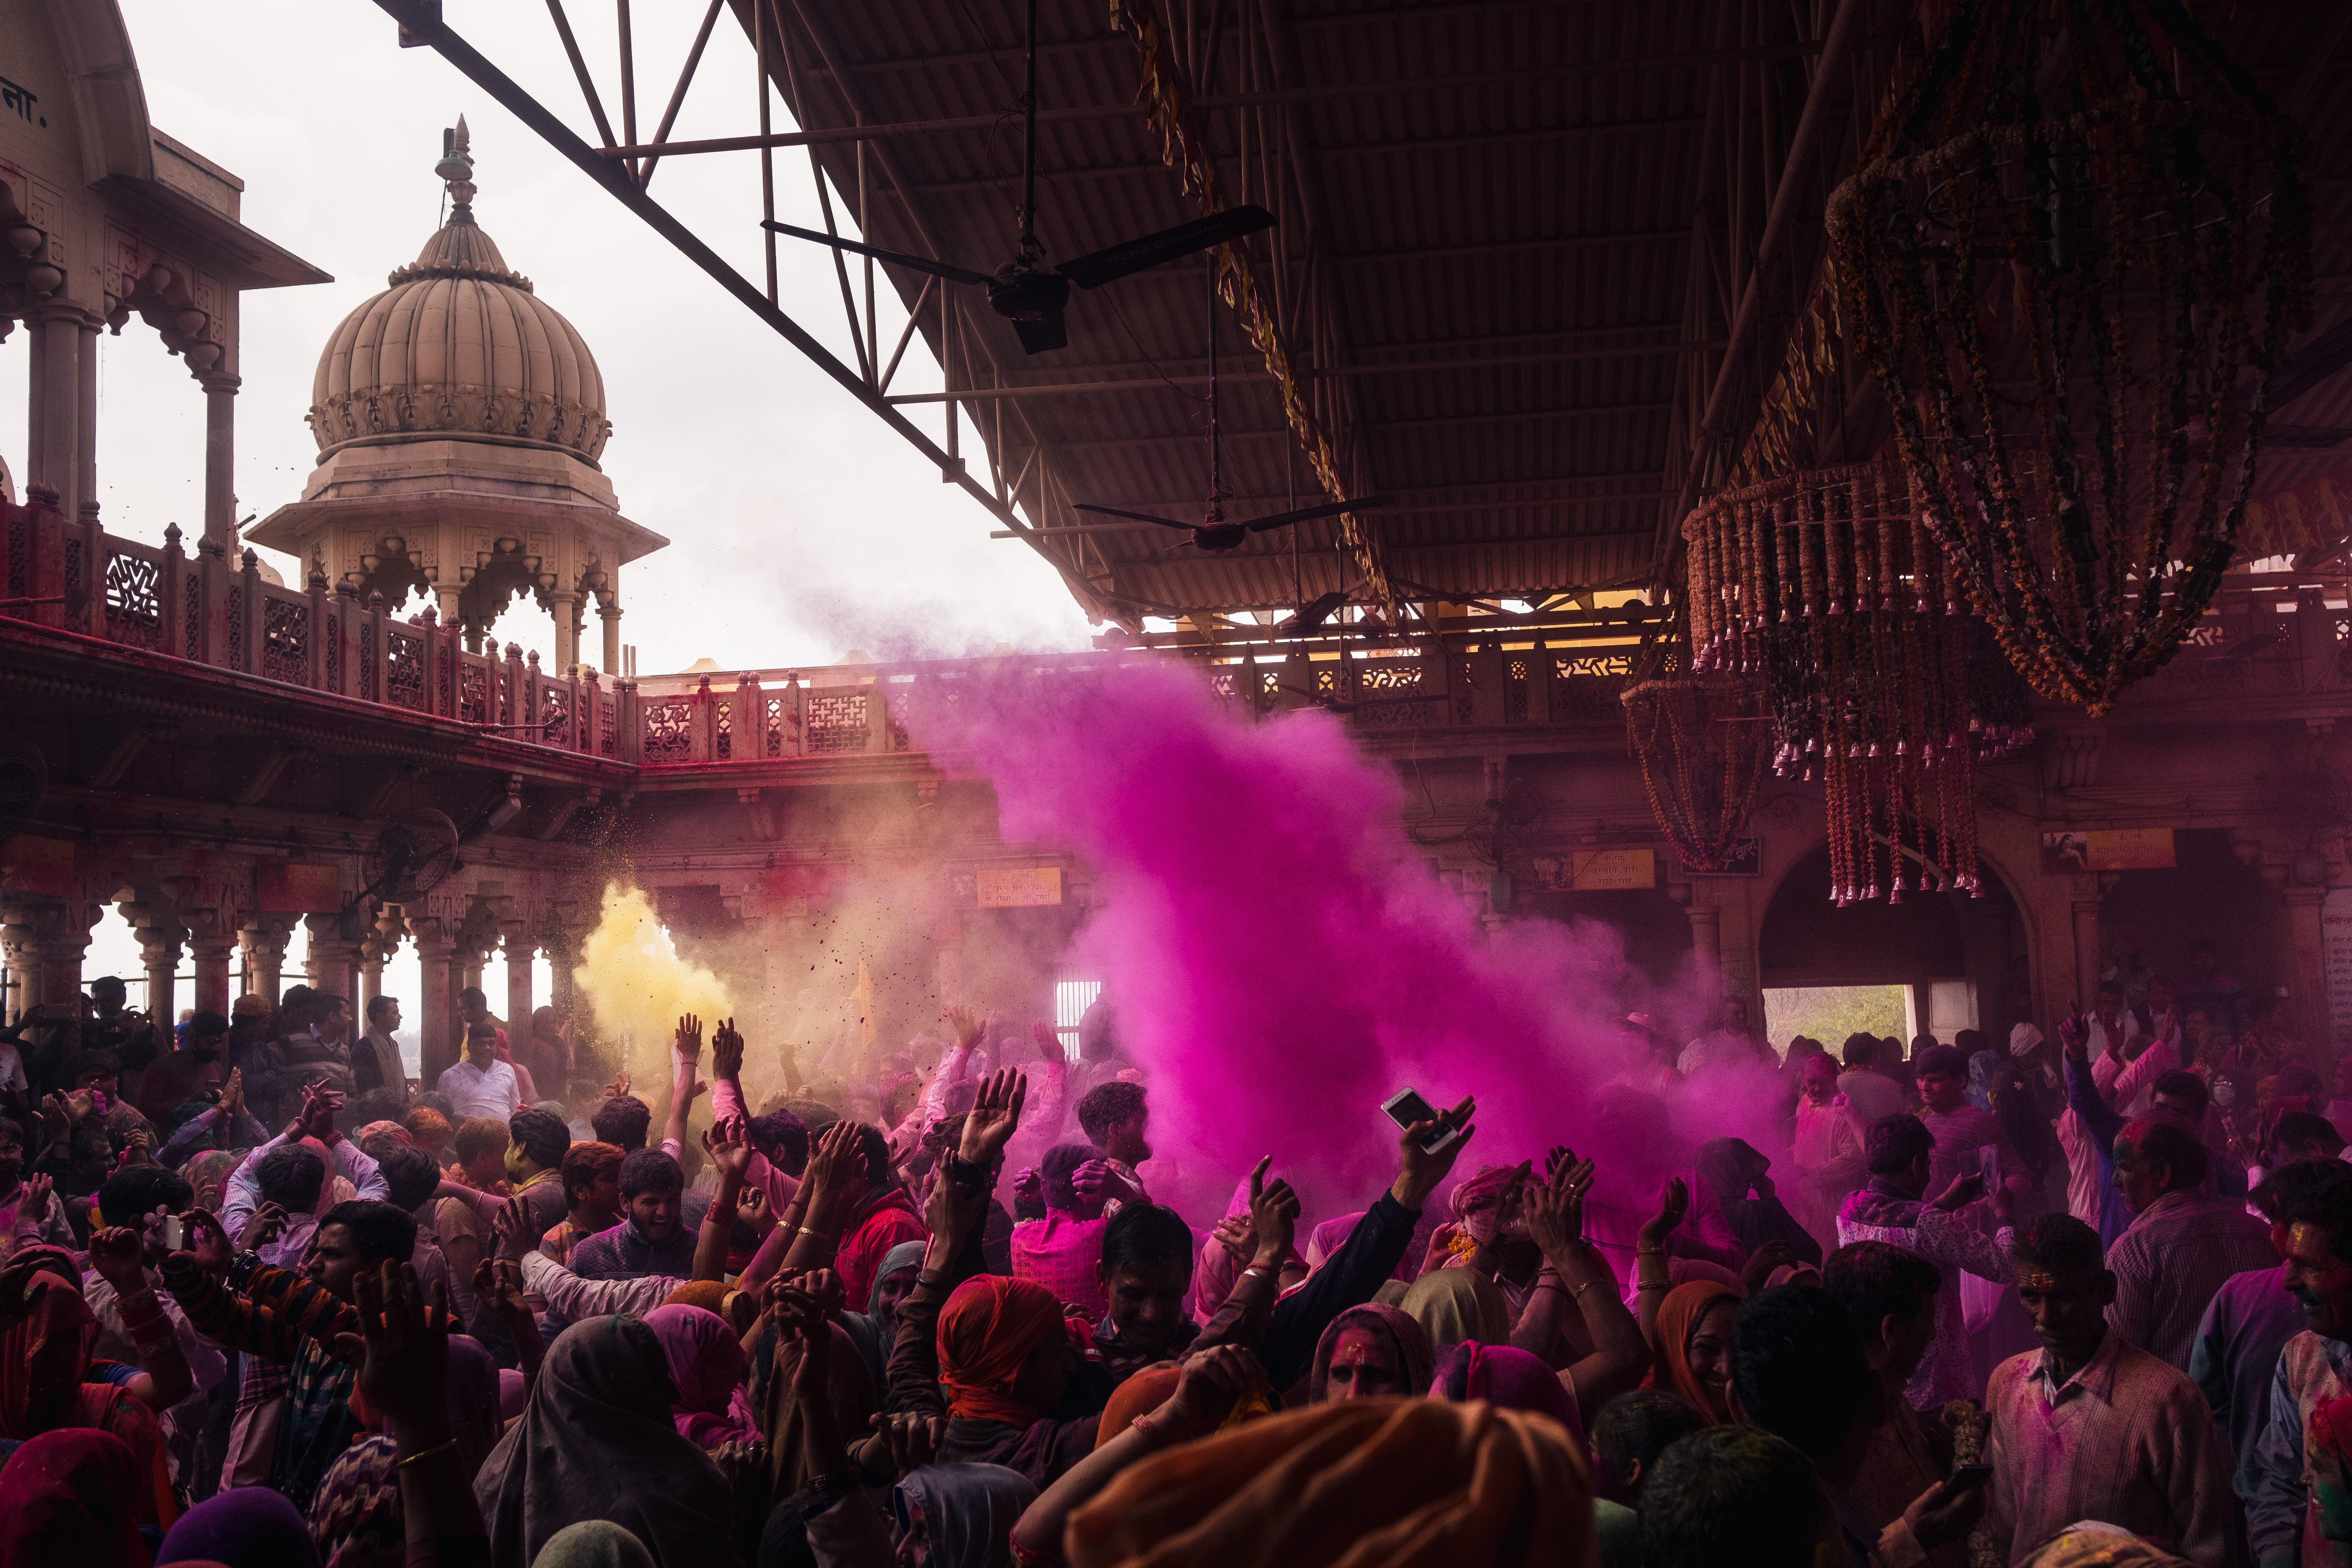 India Street Photography During Holi Festival. pink cloud of smoke rises over the crowd. Images by Jason Vinson